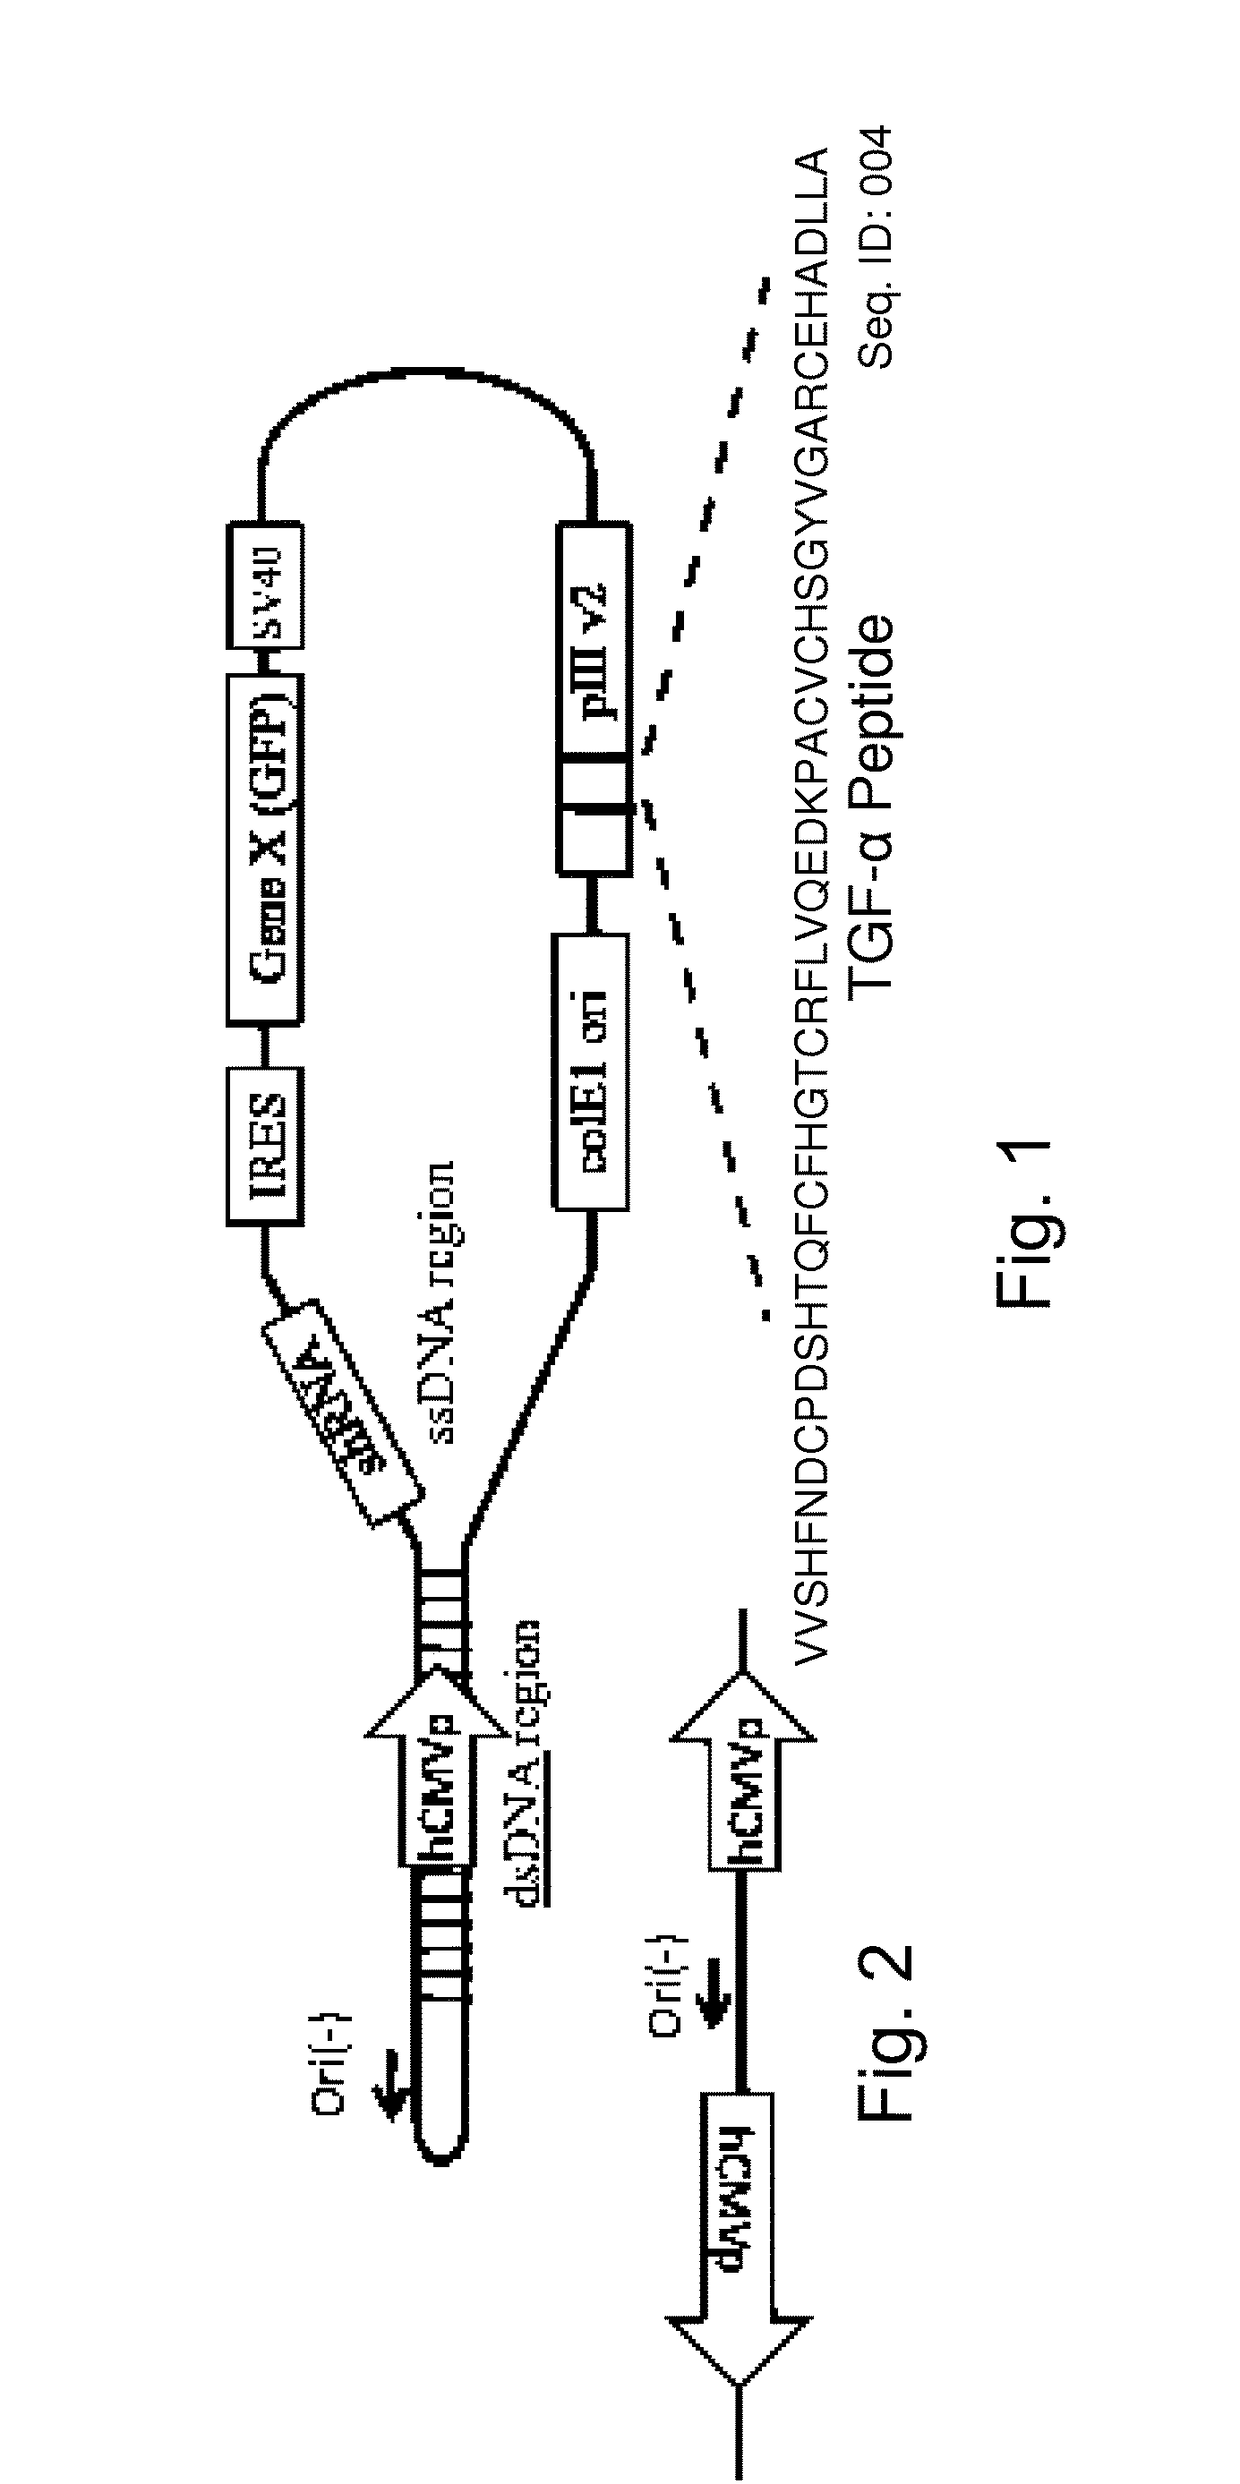 Bacteria carrying bacteriophage and protease inhibitors for the treatment of disorders and methods of treatment